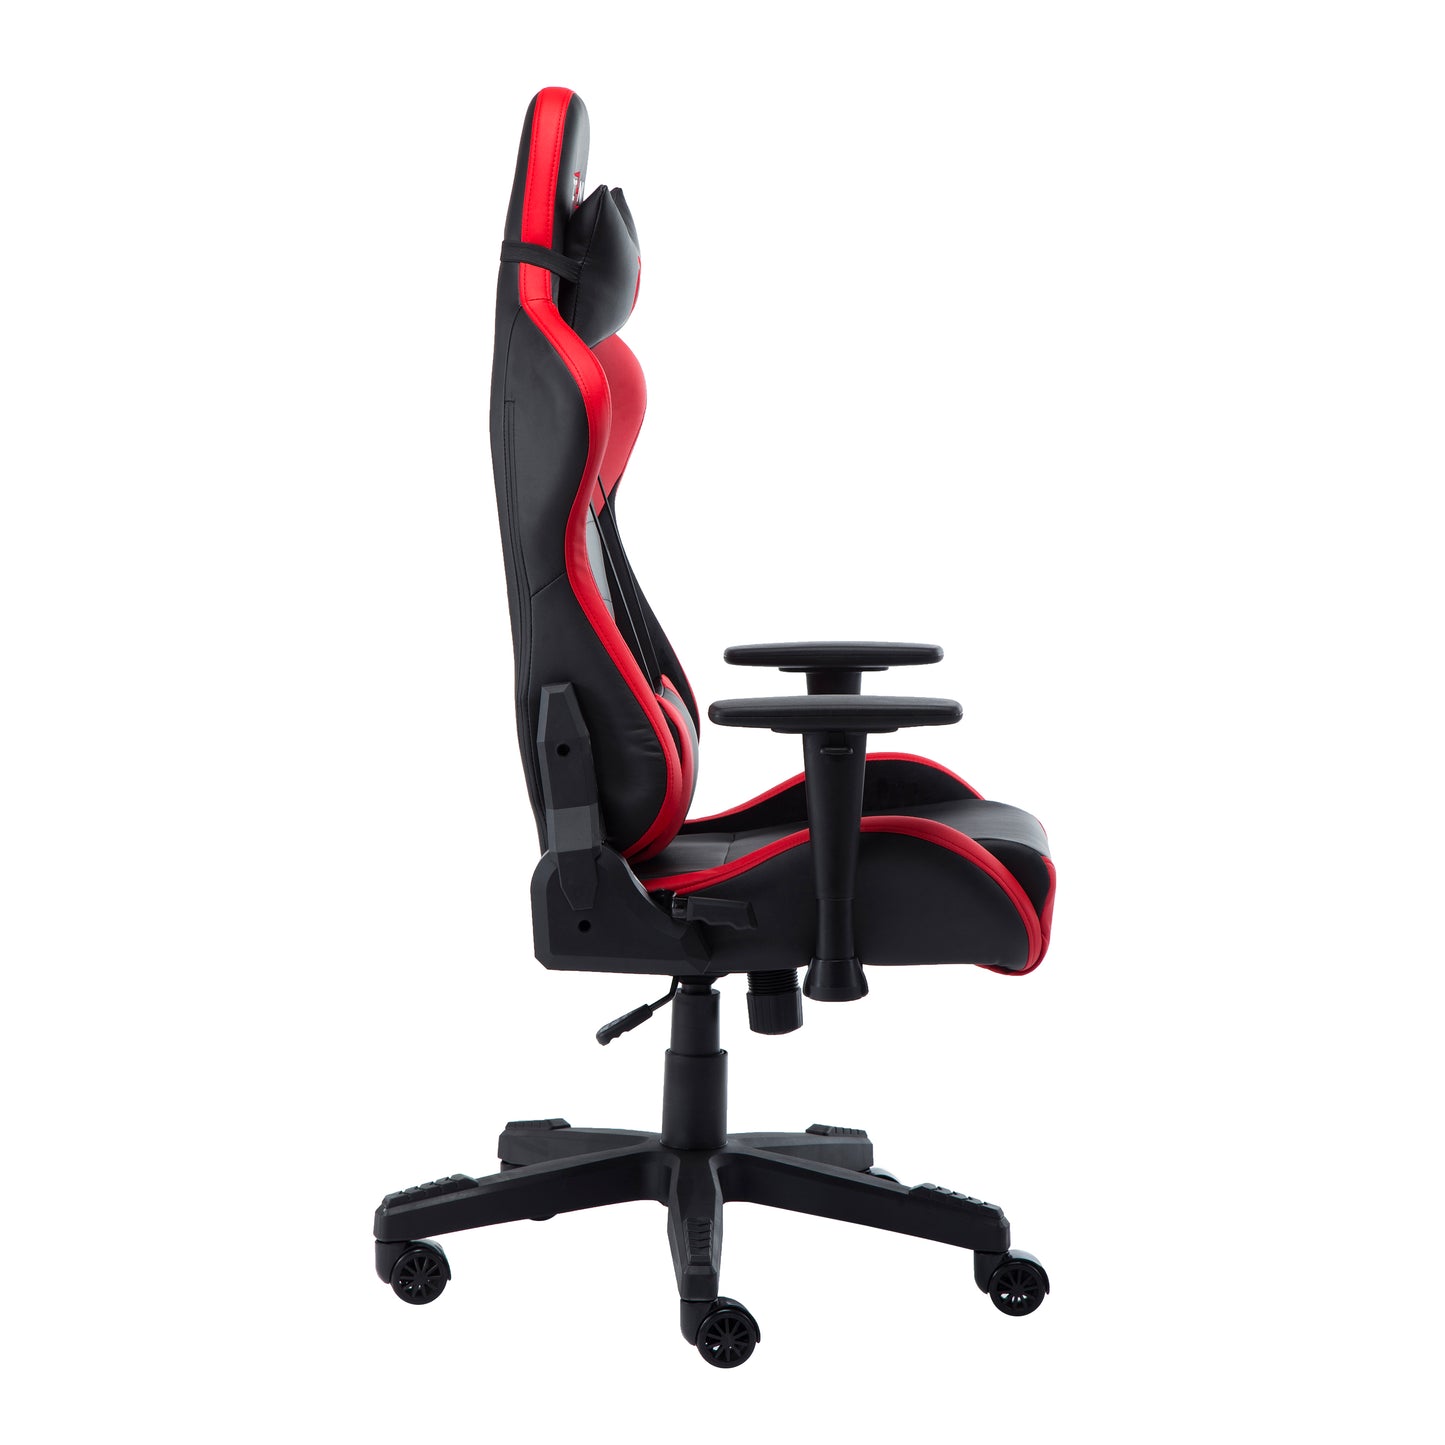 Techni Sport TS-90 Office-PC Gaming Chair, Red and Black PU Leather